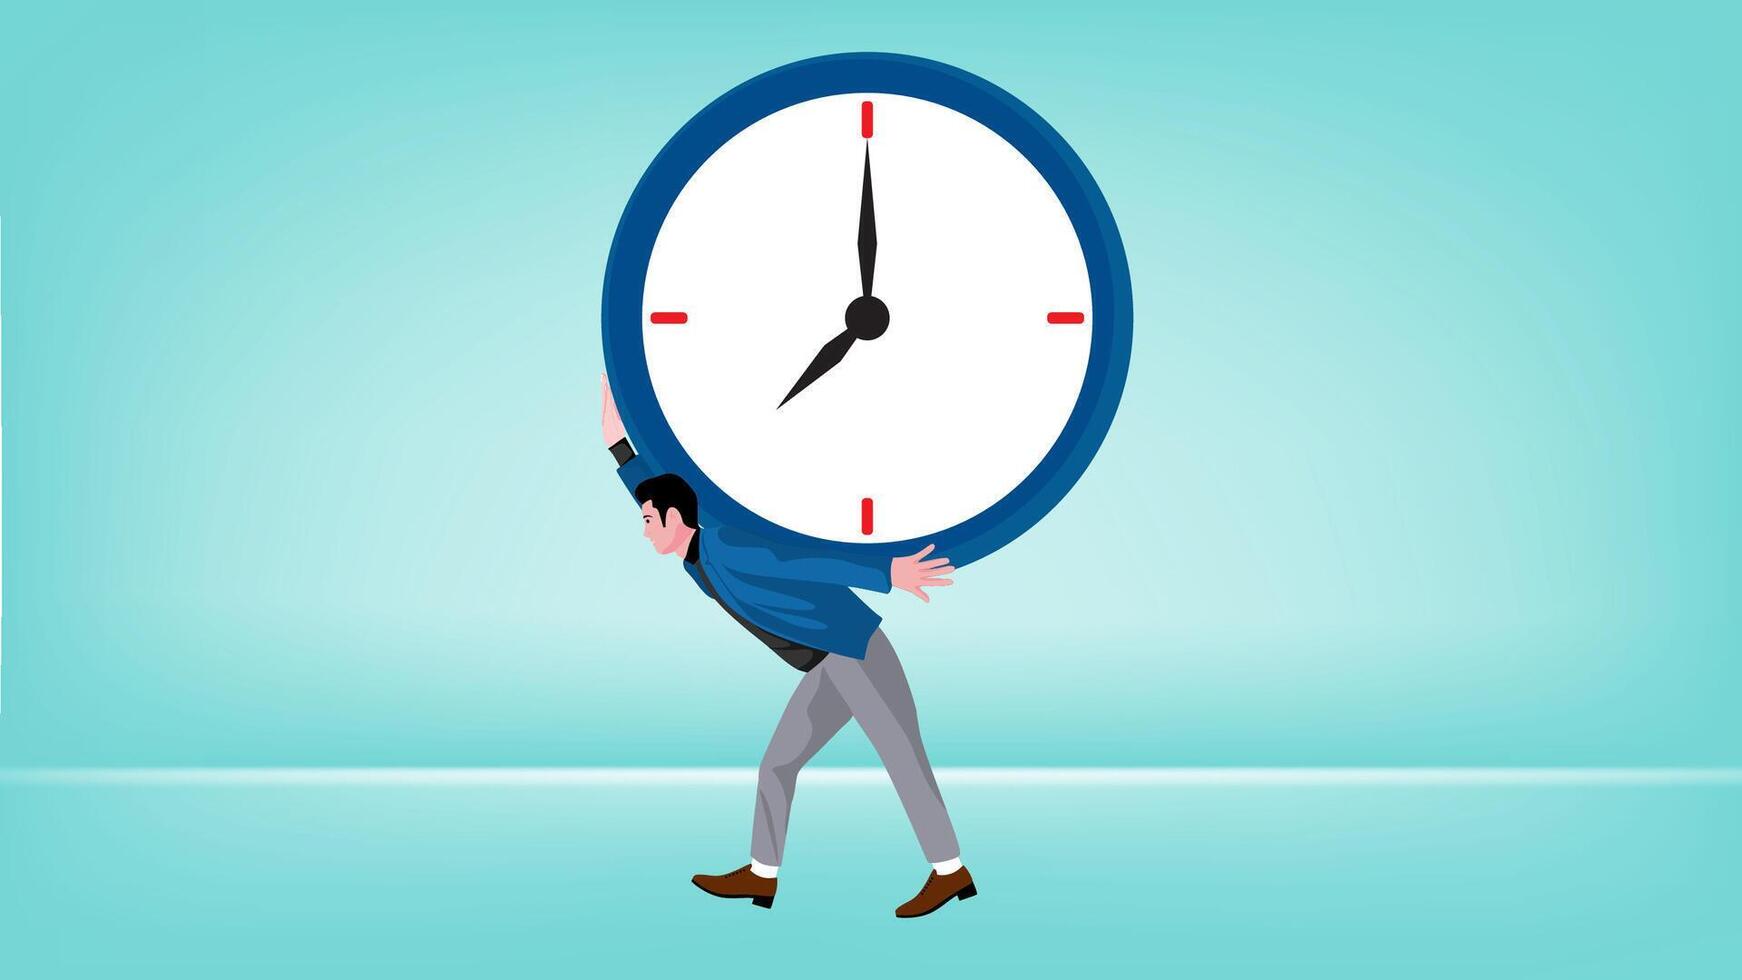 Illustration of a businessman carrying a watch with a flat design style, work deadline concept, time management vector